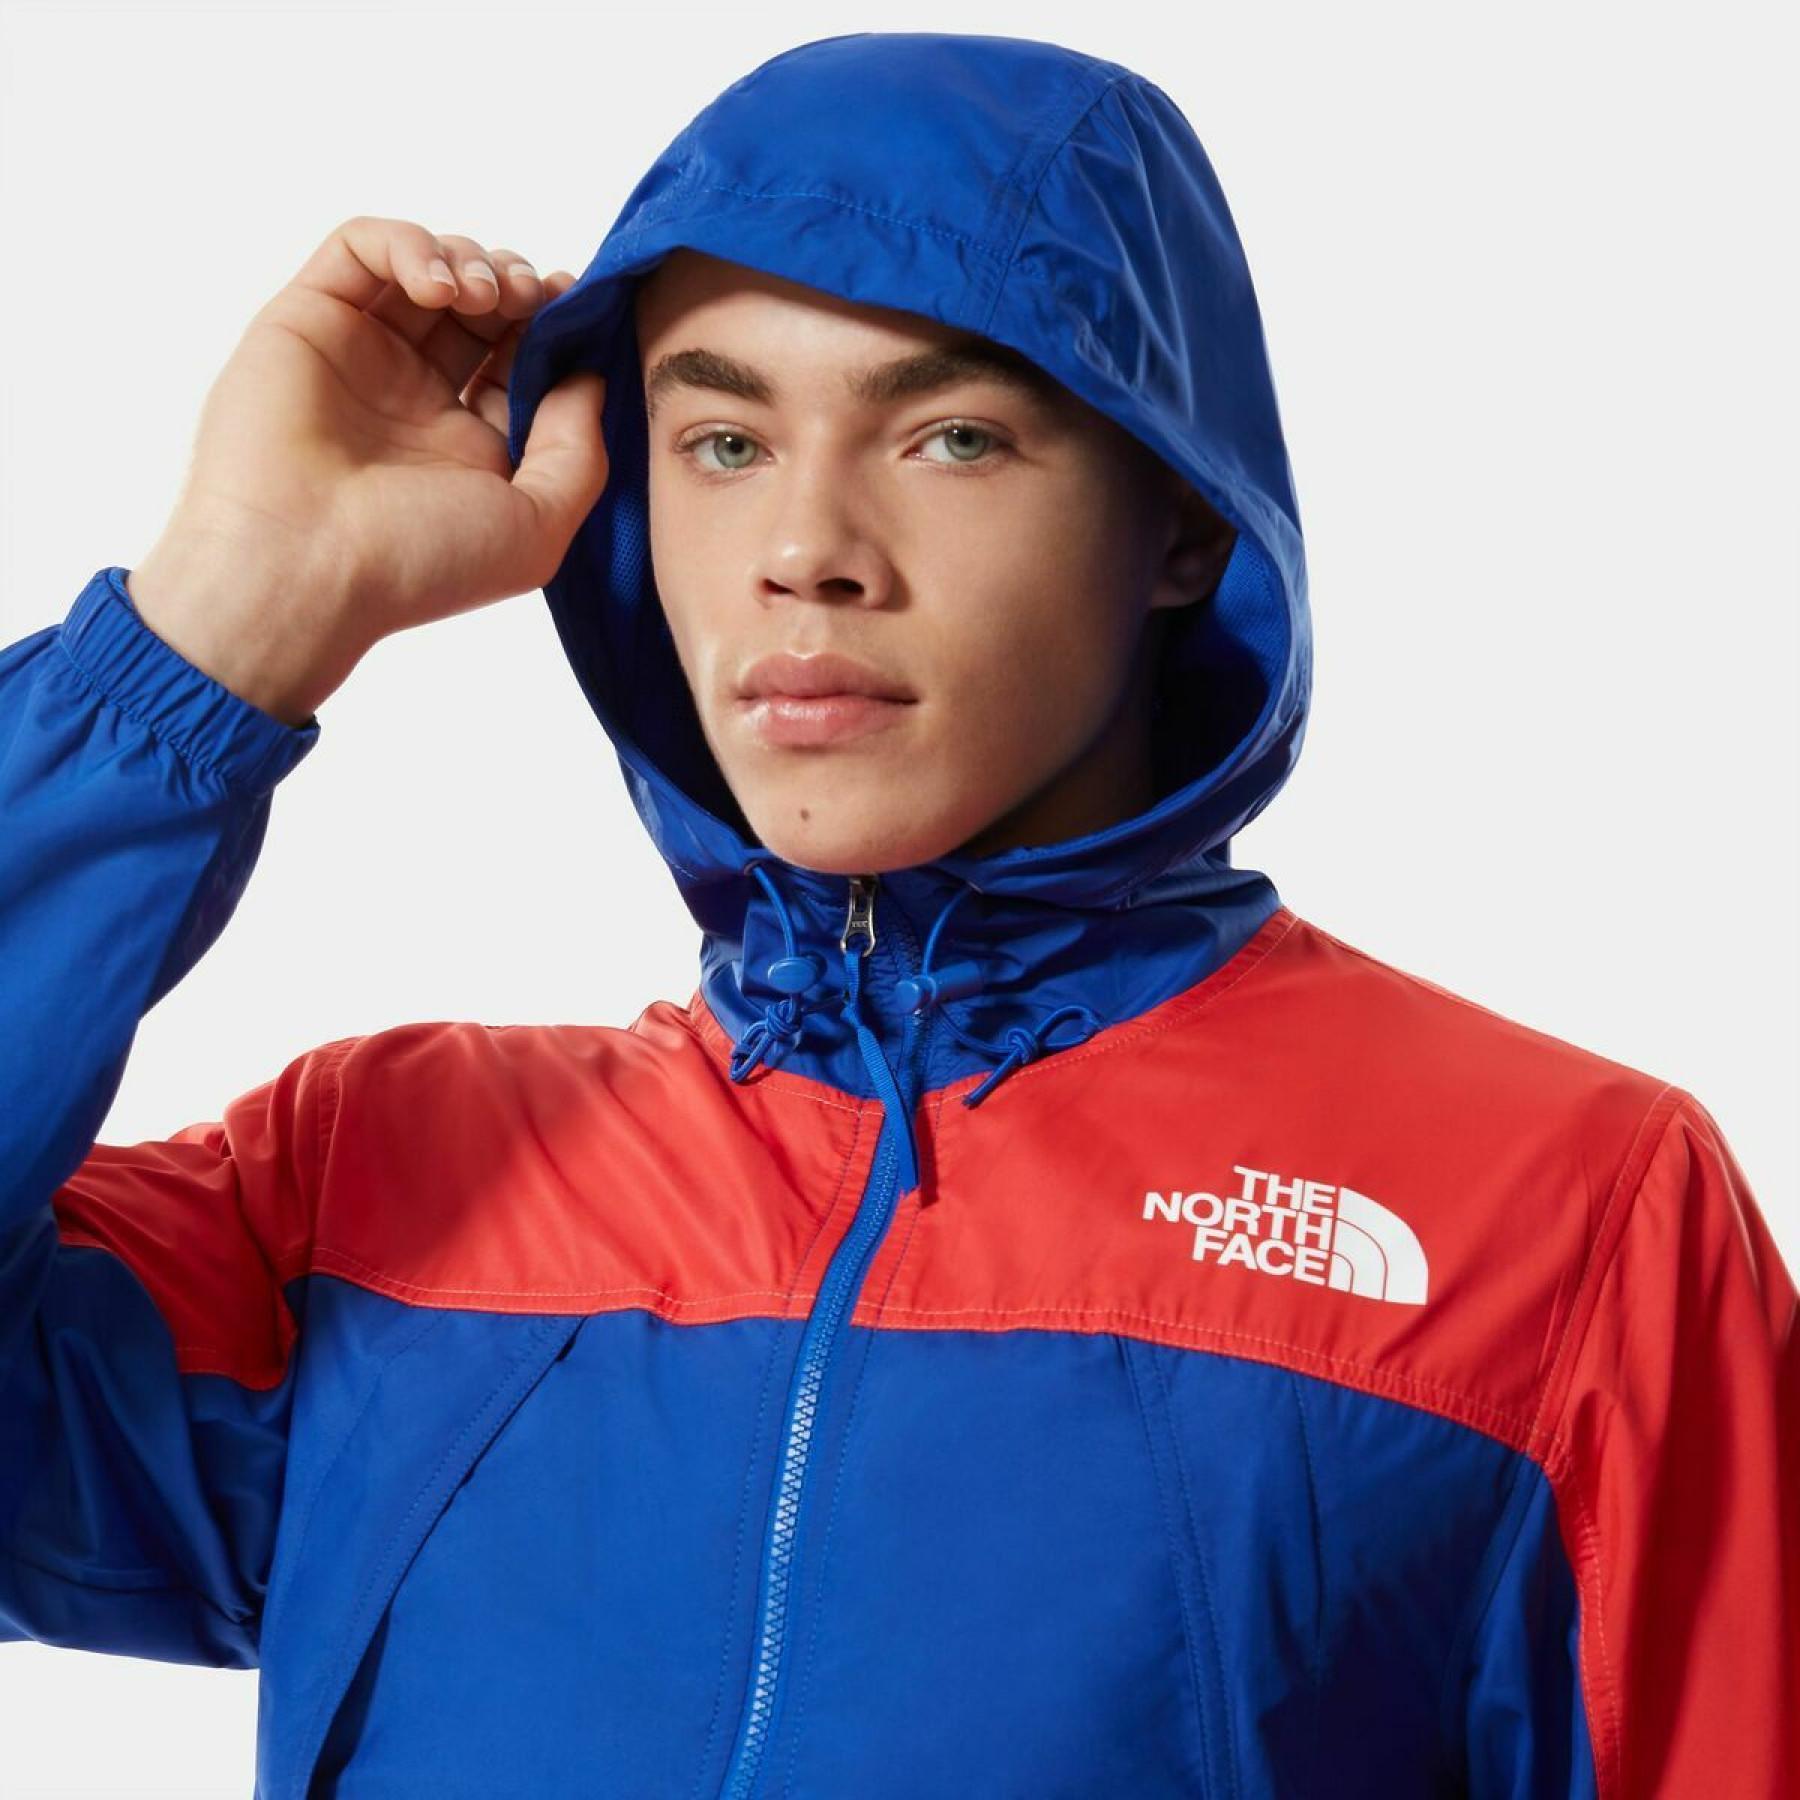 Jacka The North Face Hydrenaline